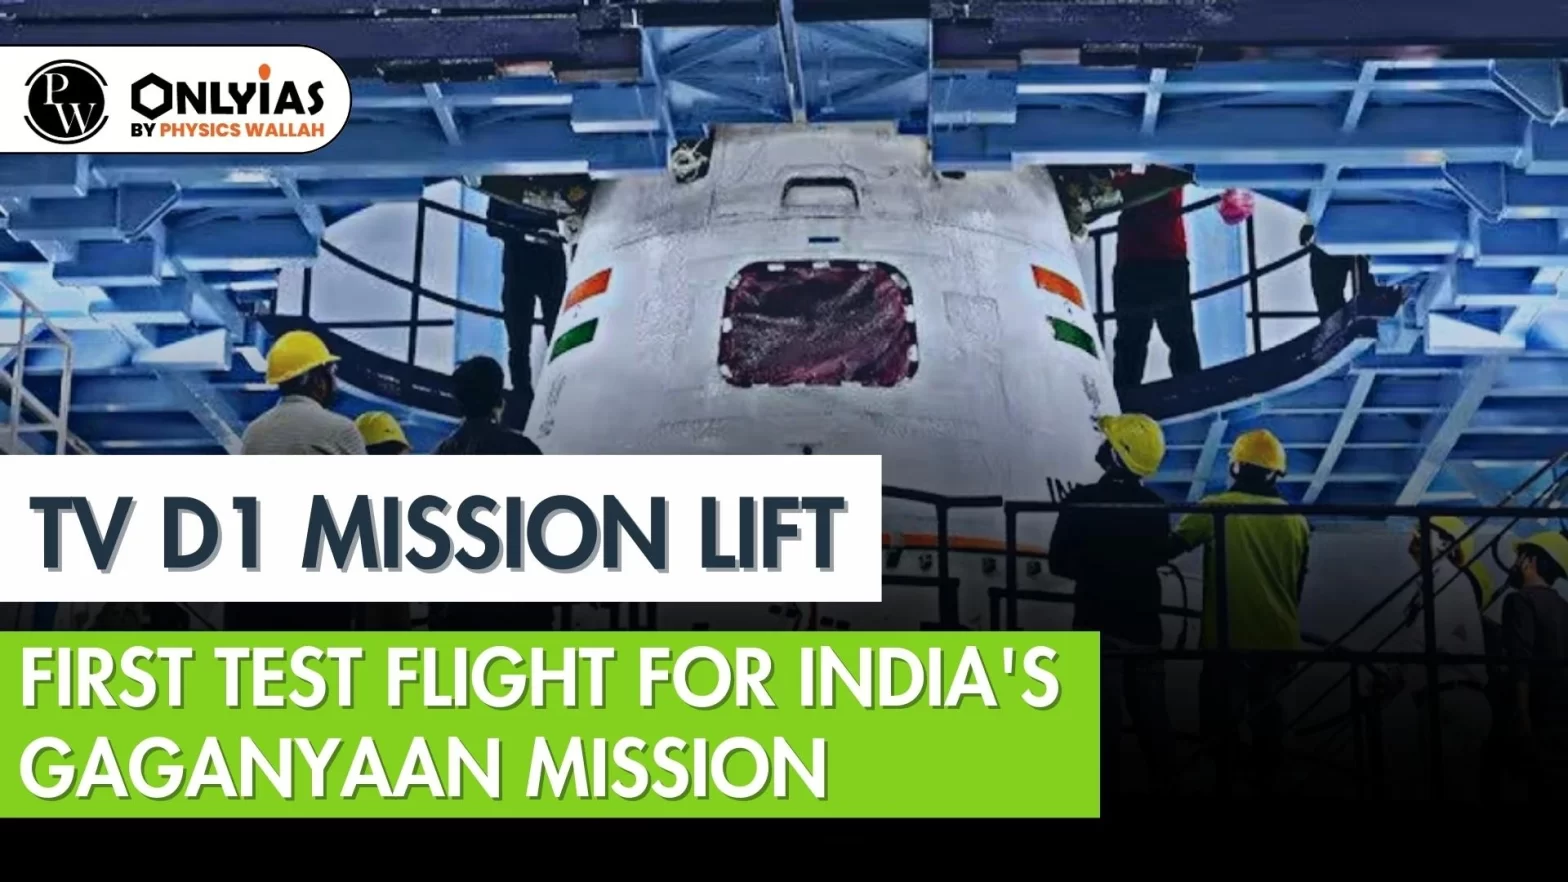 TV D1 Mission Lift: First Test Flight for India’s Gaganyaan Mission